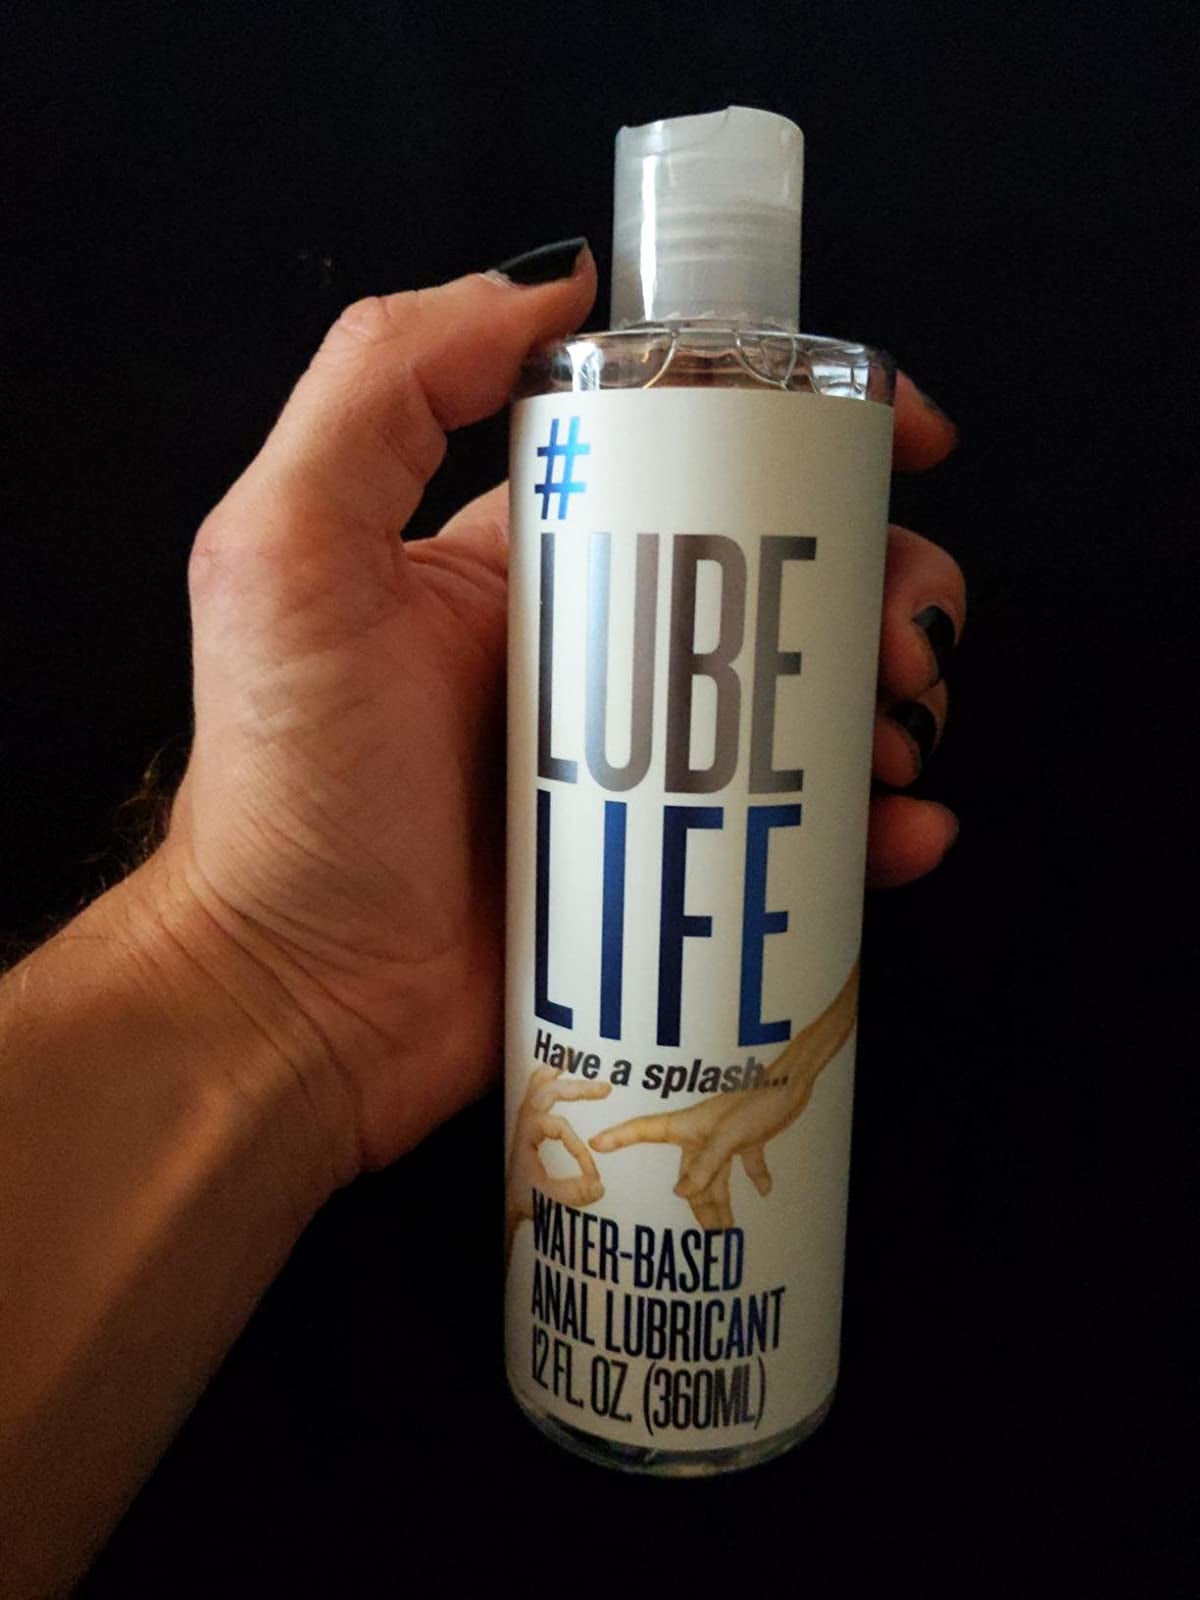 Model holding white and blue bottle of lubricant